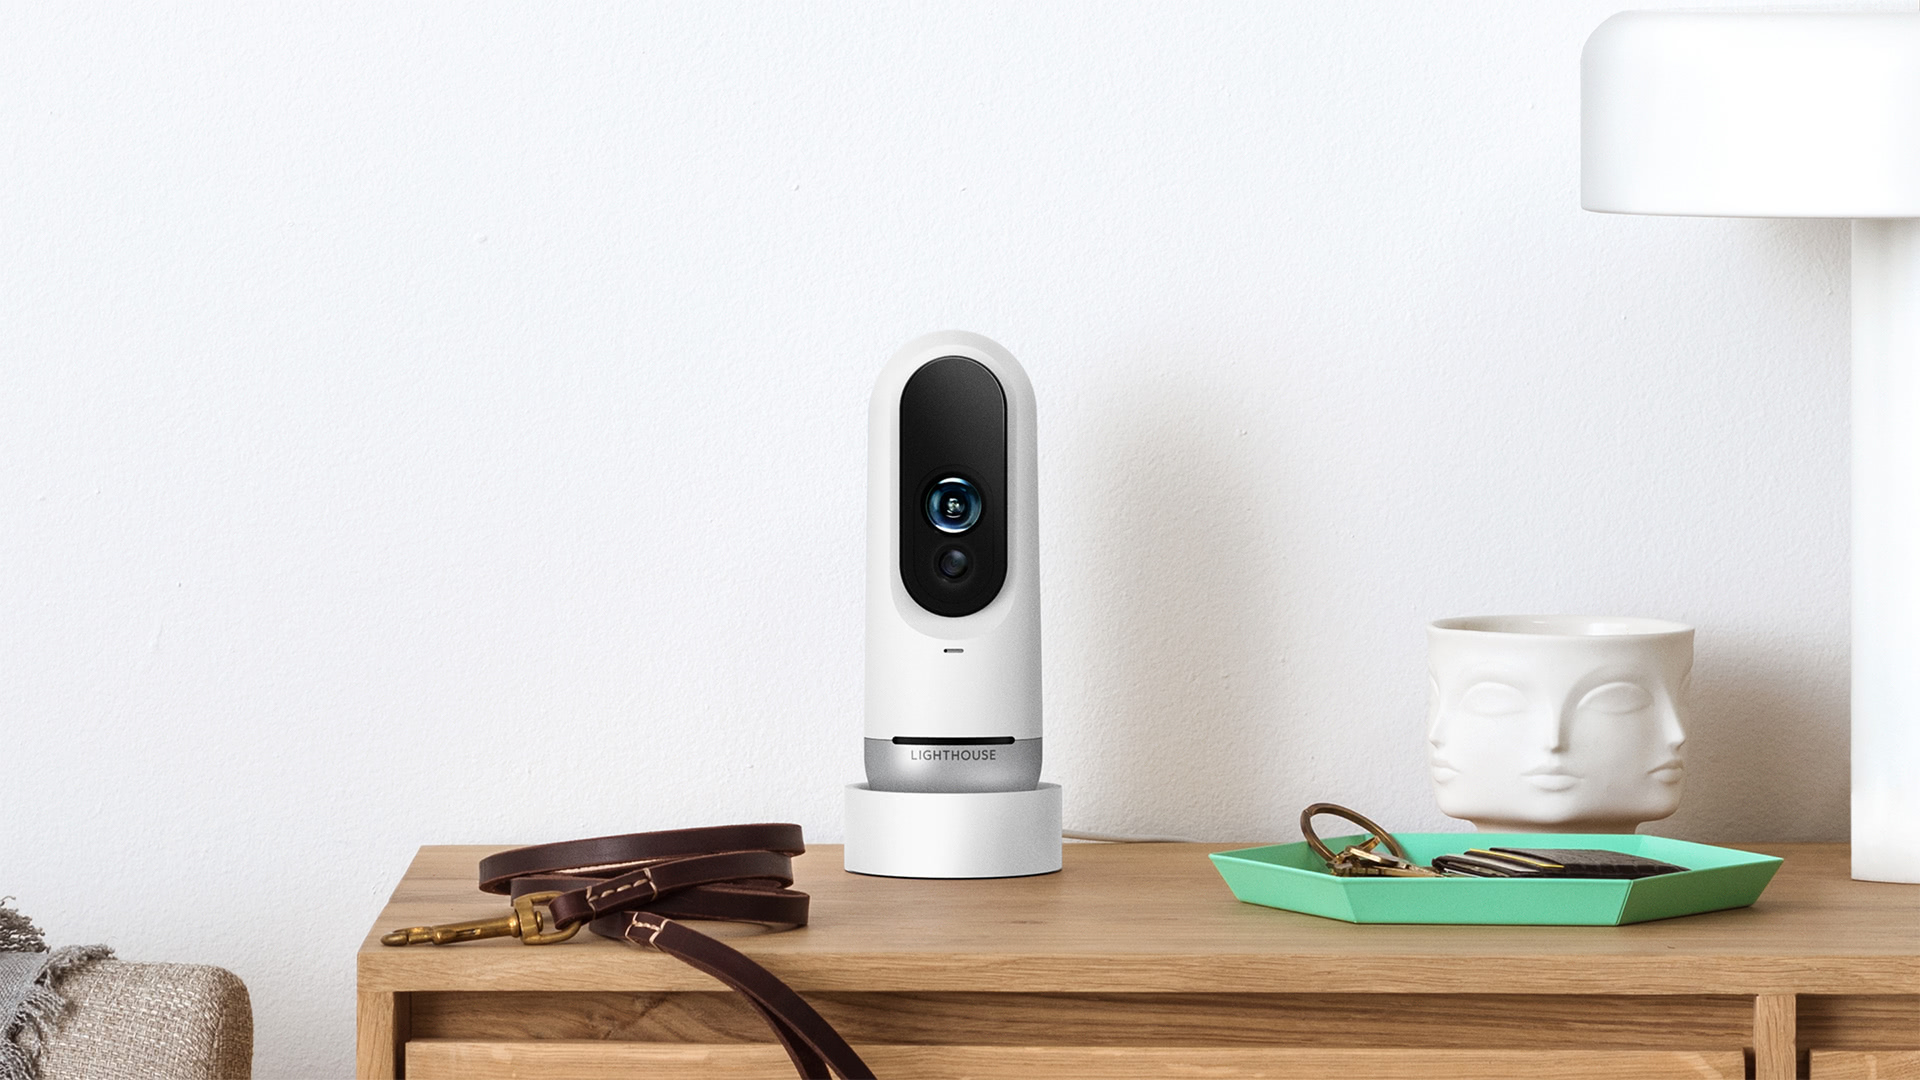 Artificial Intelligence Startup Lighthouse Has Raised $17 Million to Provide Home Security Solution